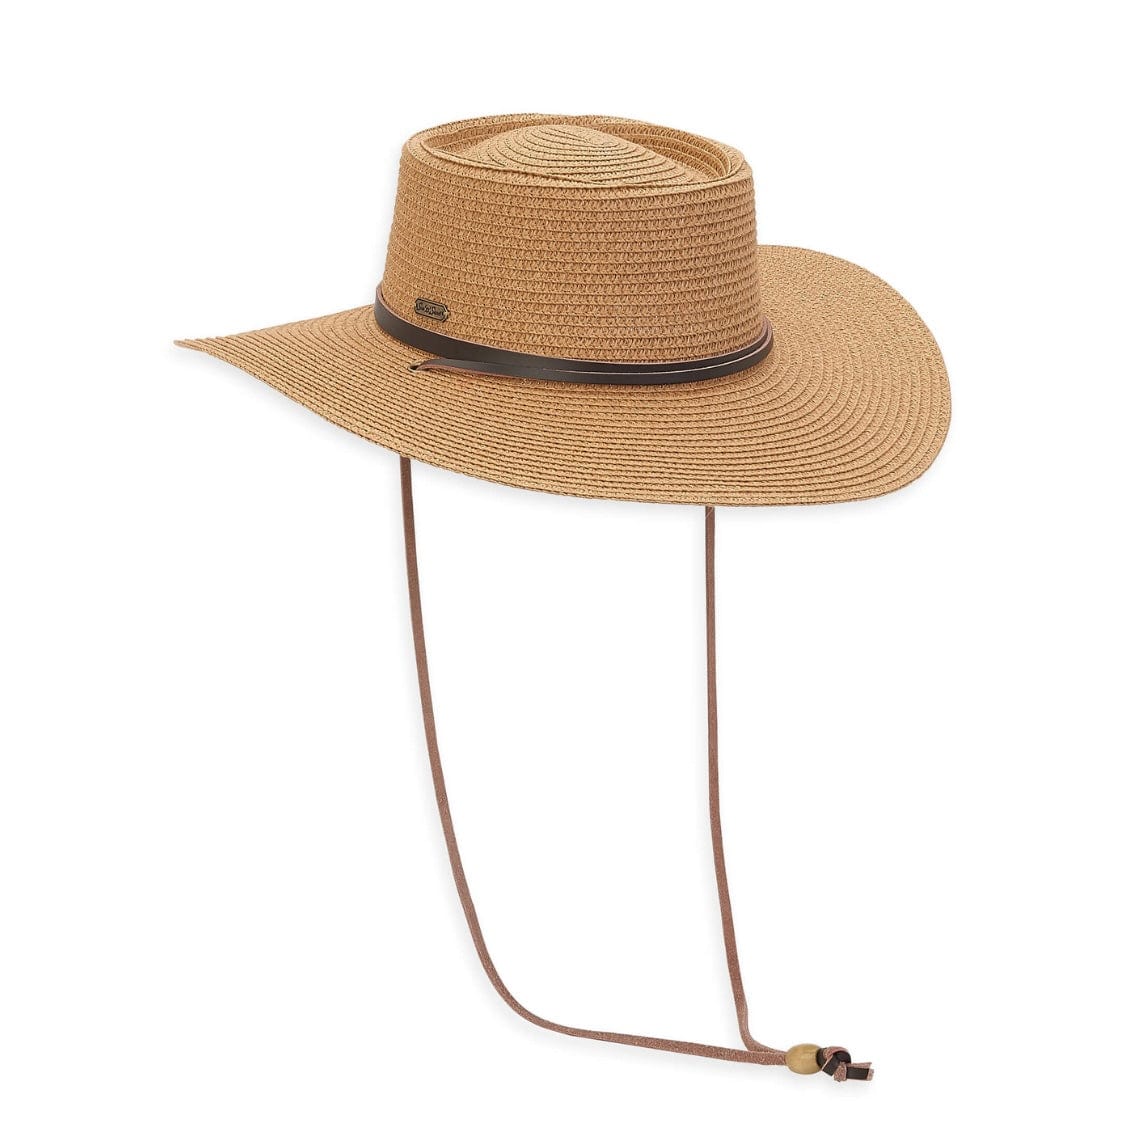 Island Girl Hats Tan Island Girl Hats- Gambler equestrian team apparel online tack store mobile tack store custom farm apparel custom show stable clothing equestrian lifestyle horse show clothing riding clothes horses equestrian tack store